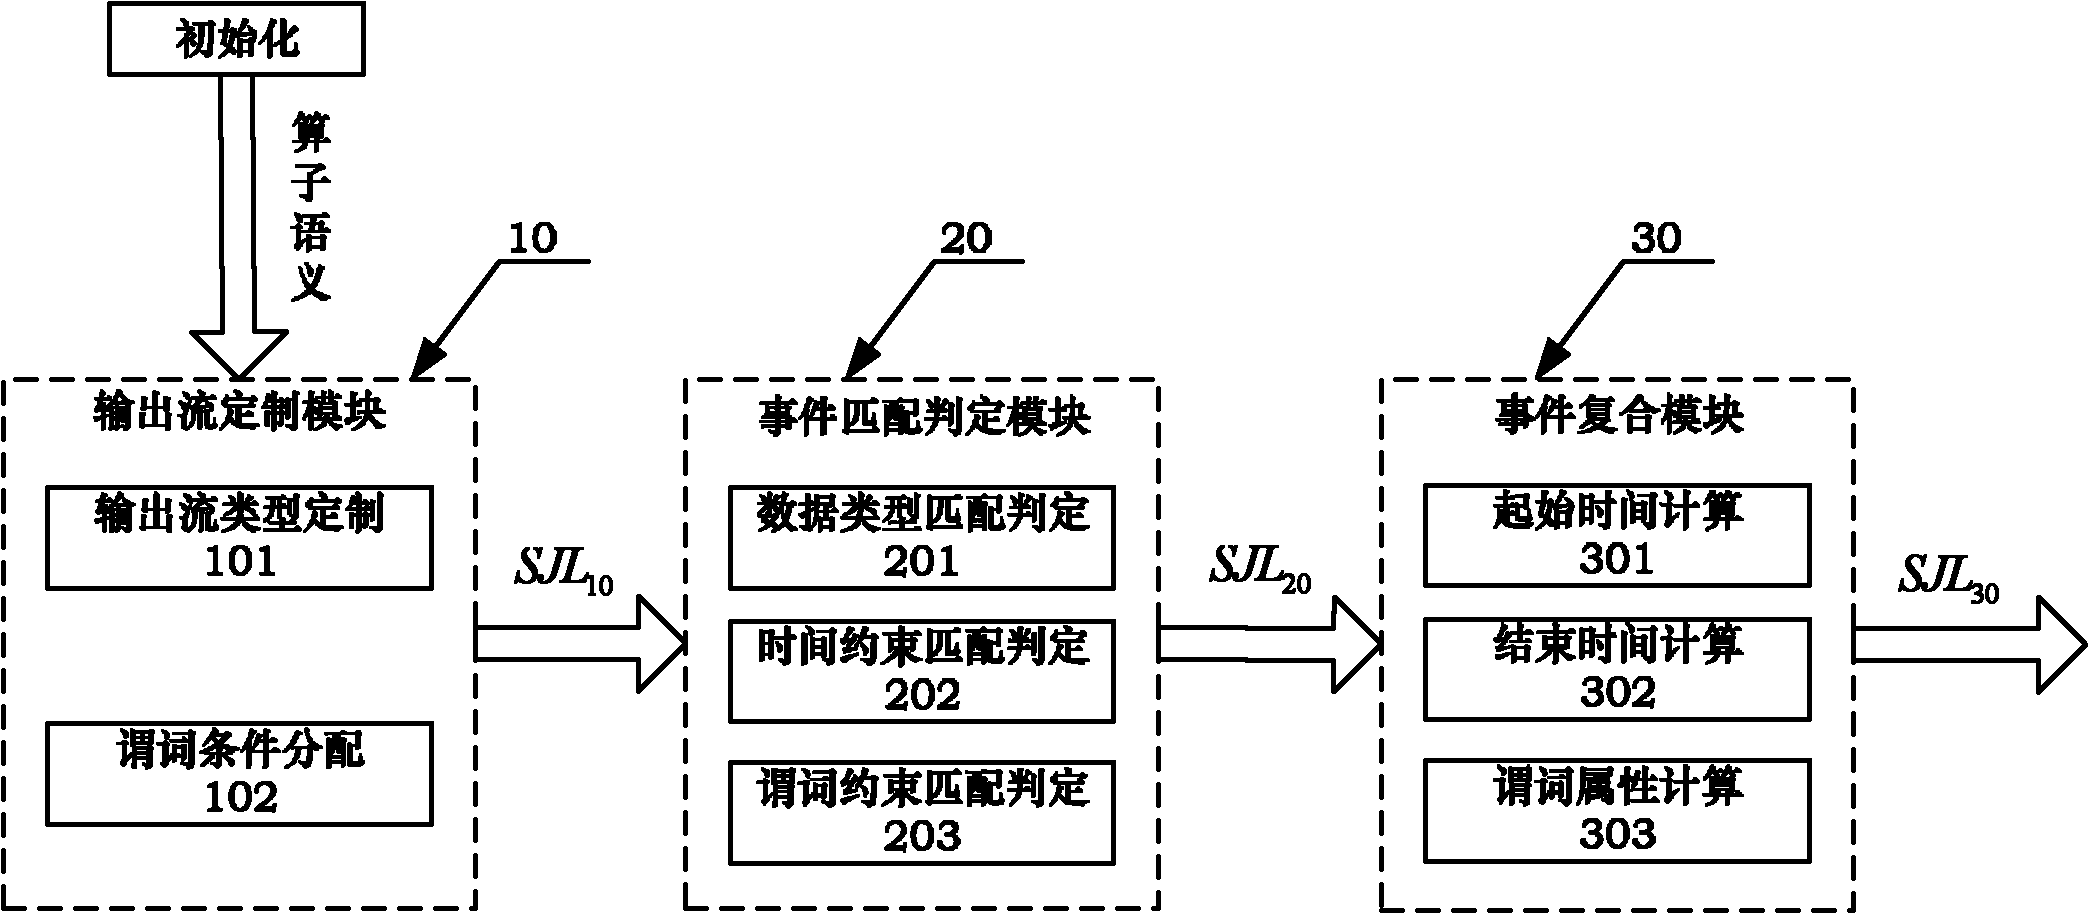 Tree complex event processing process-based operator internal processing system